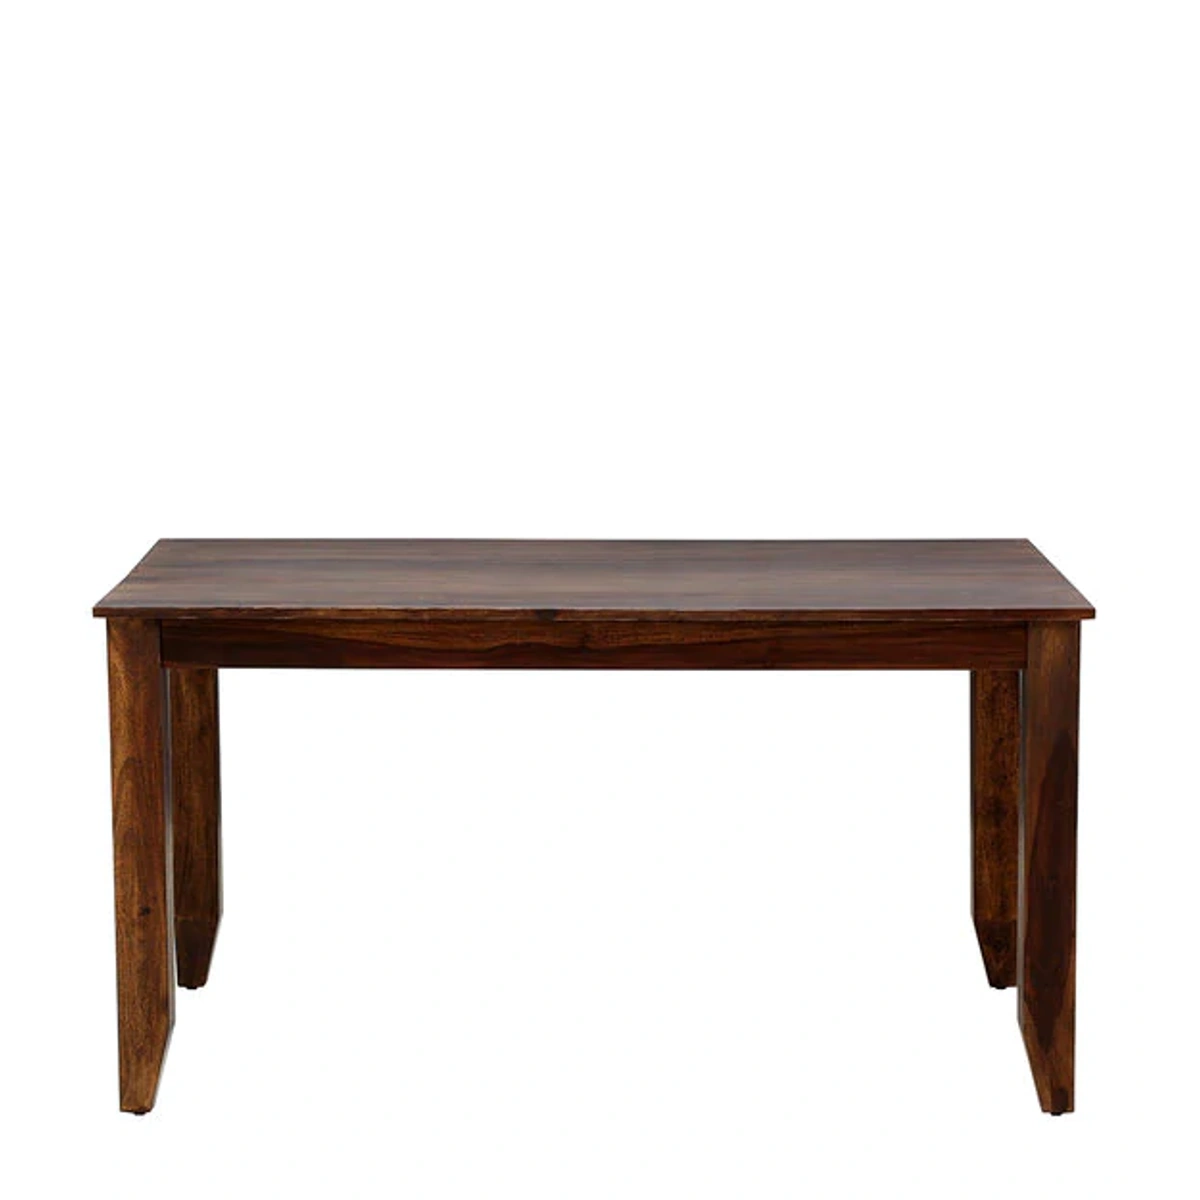 Ramdoot furniture Solid Wood 6 Seater Dining Table In Provincial ...